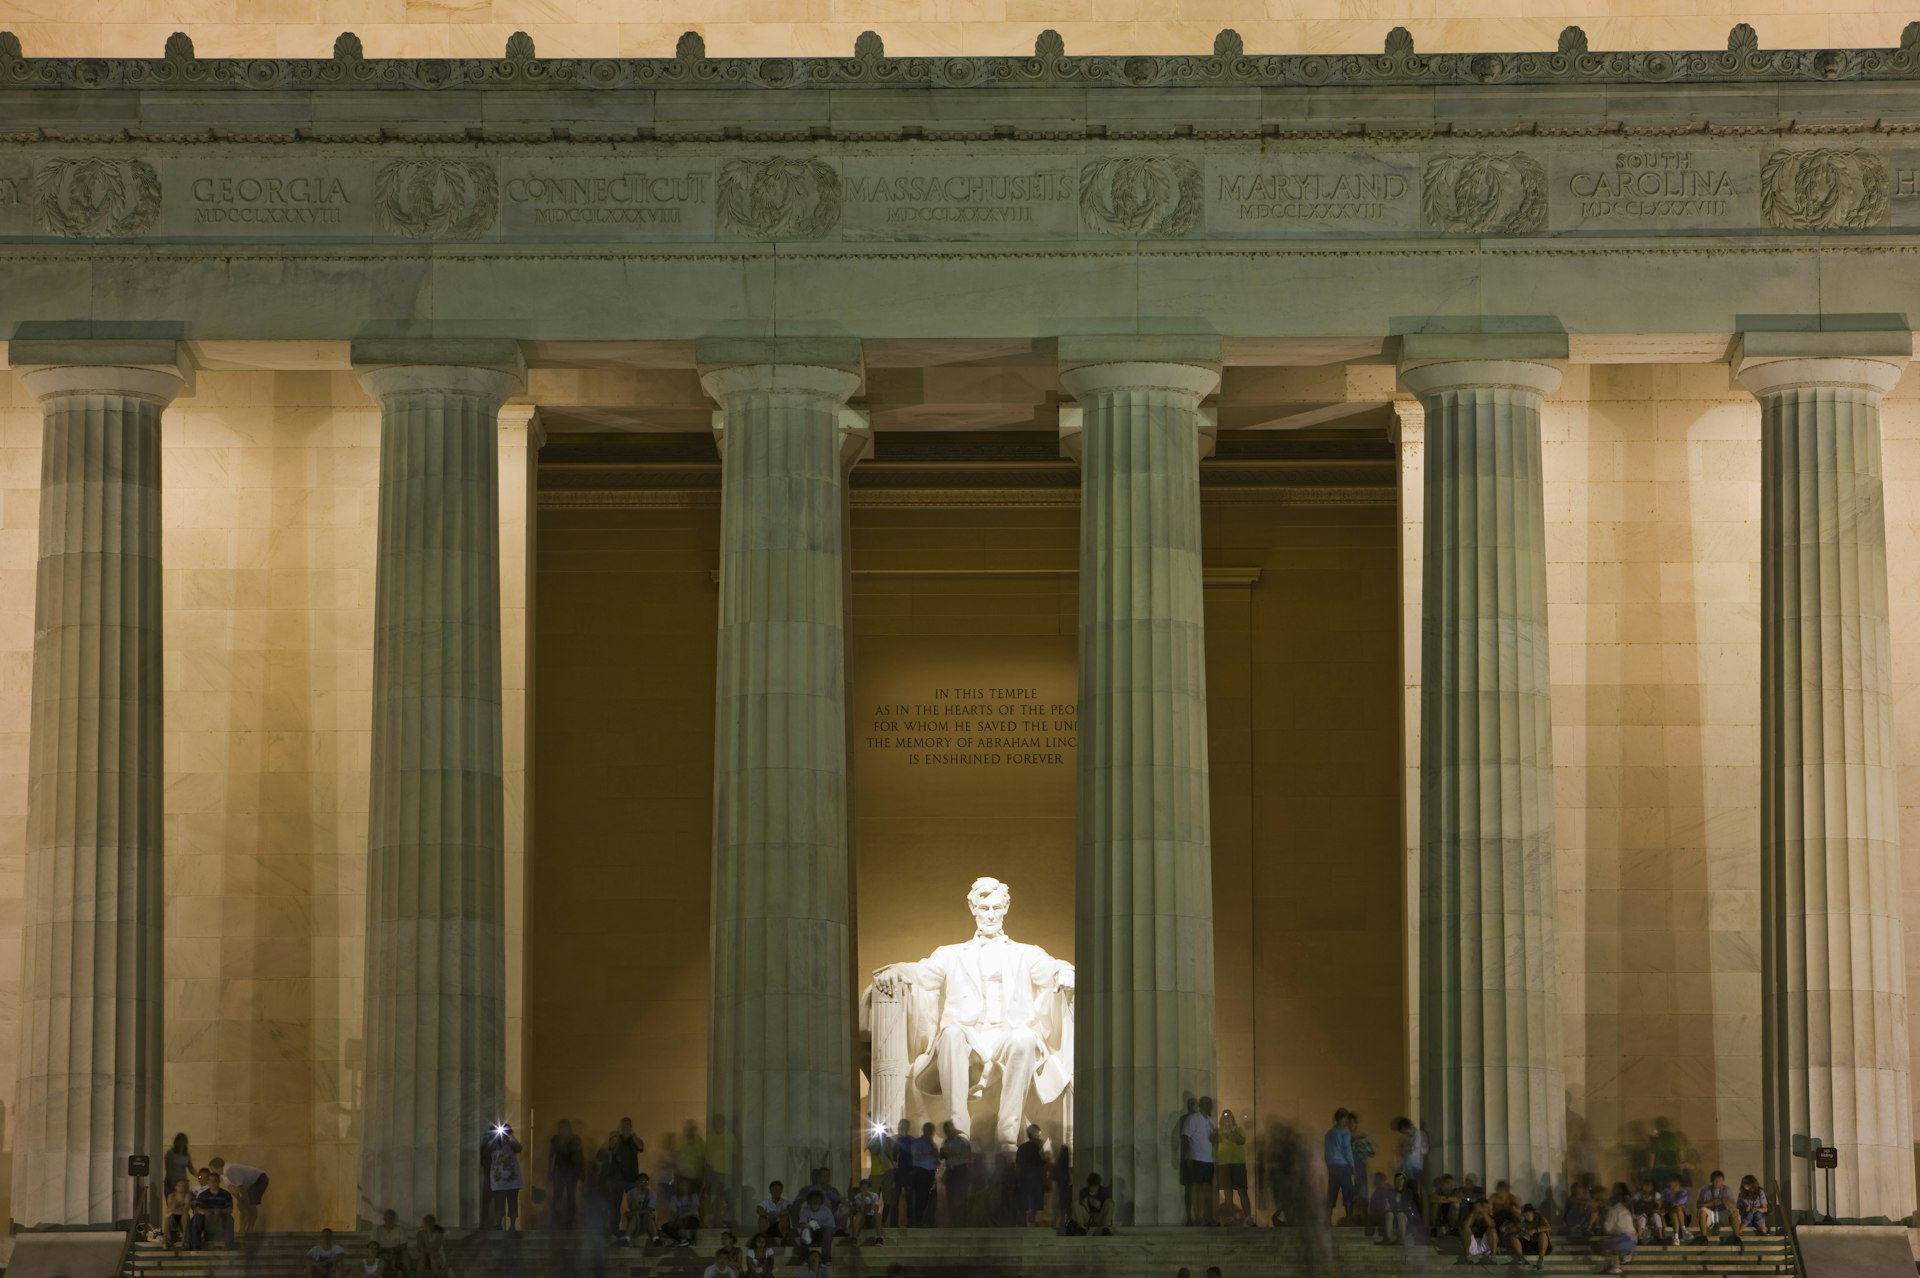 Tourists on the steps of the Lincoln Memorial at night, Washington, DC, USA